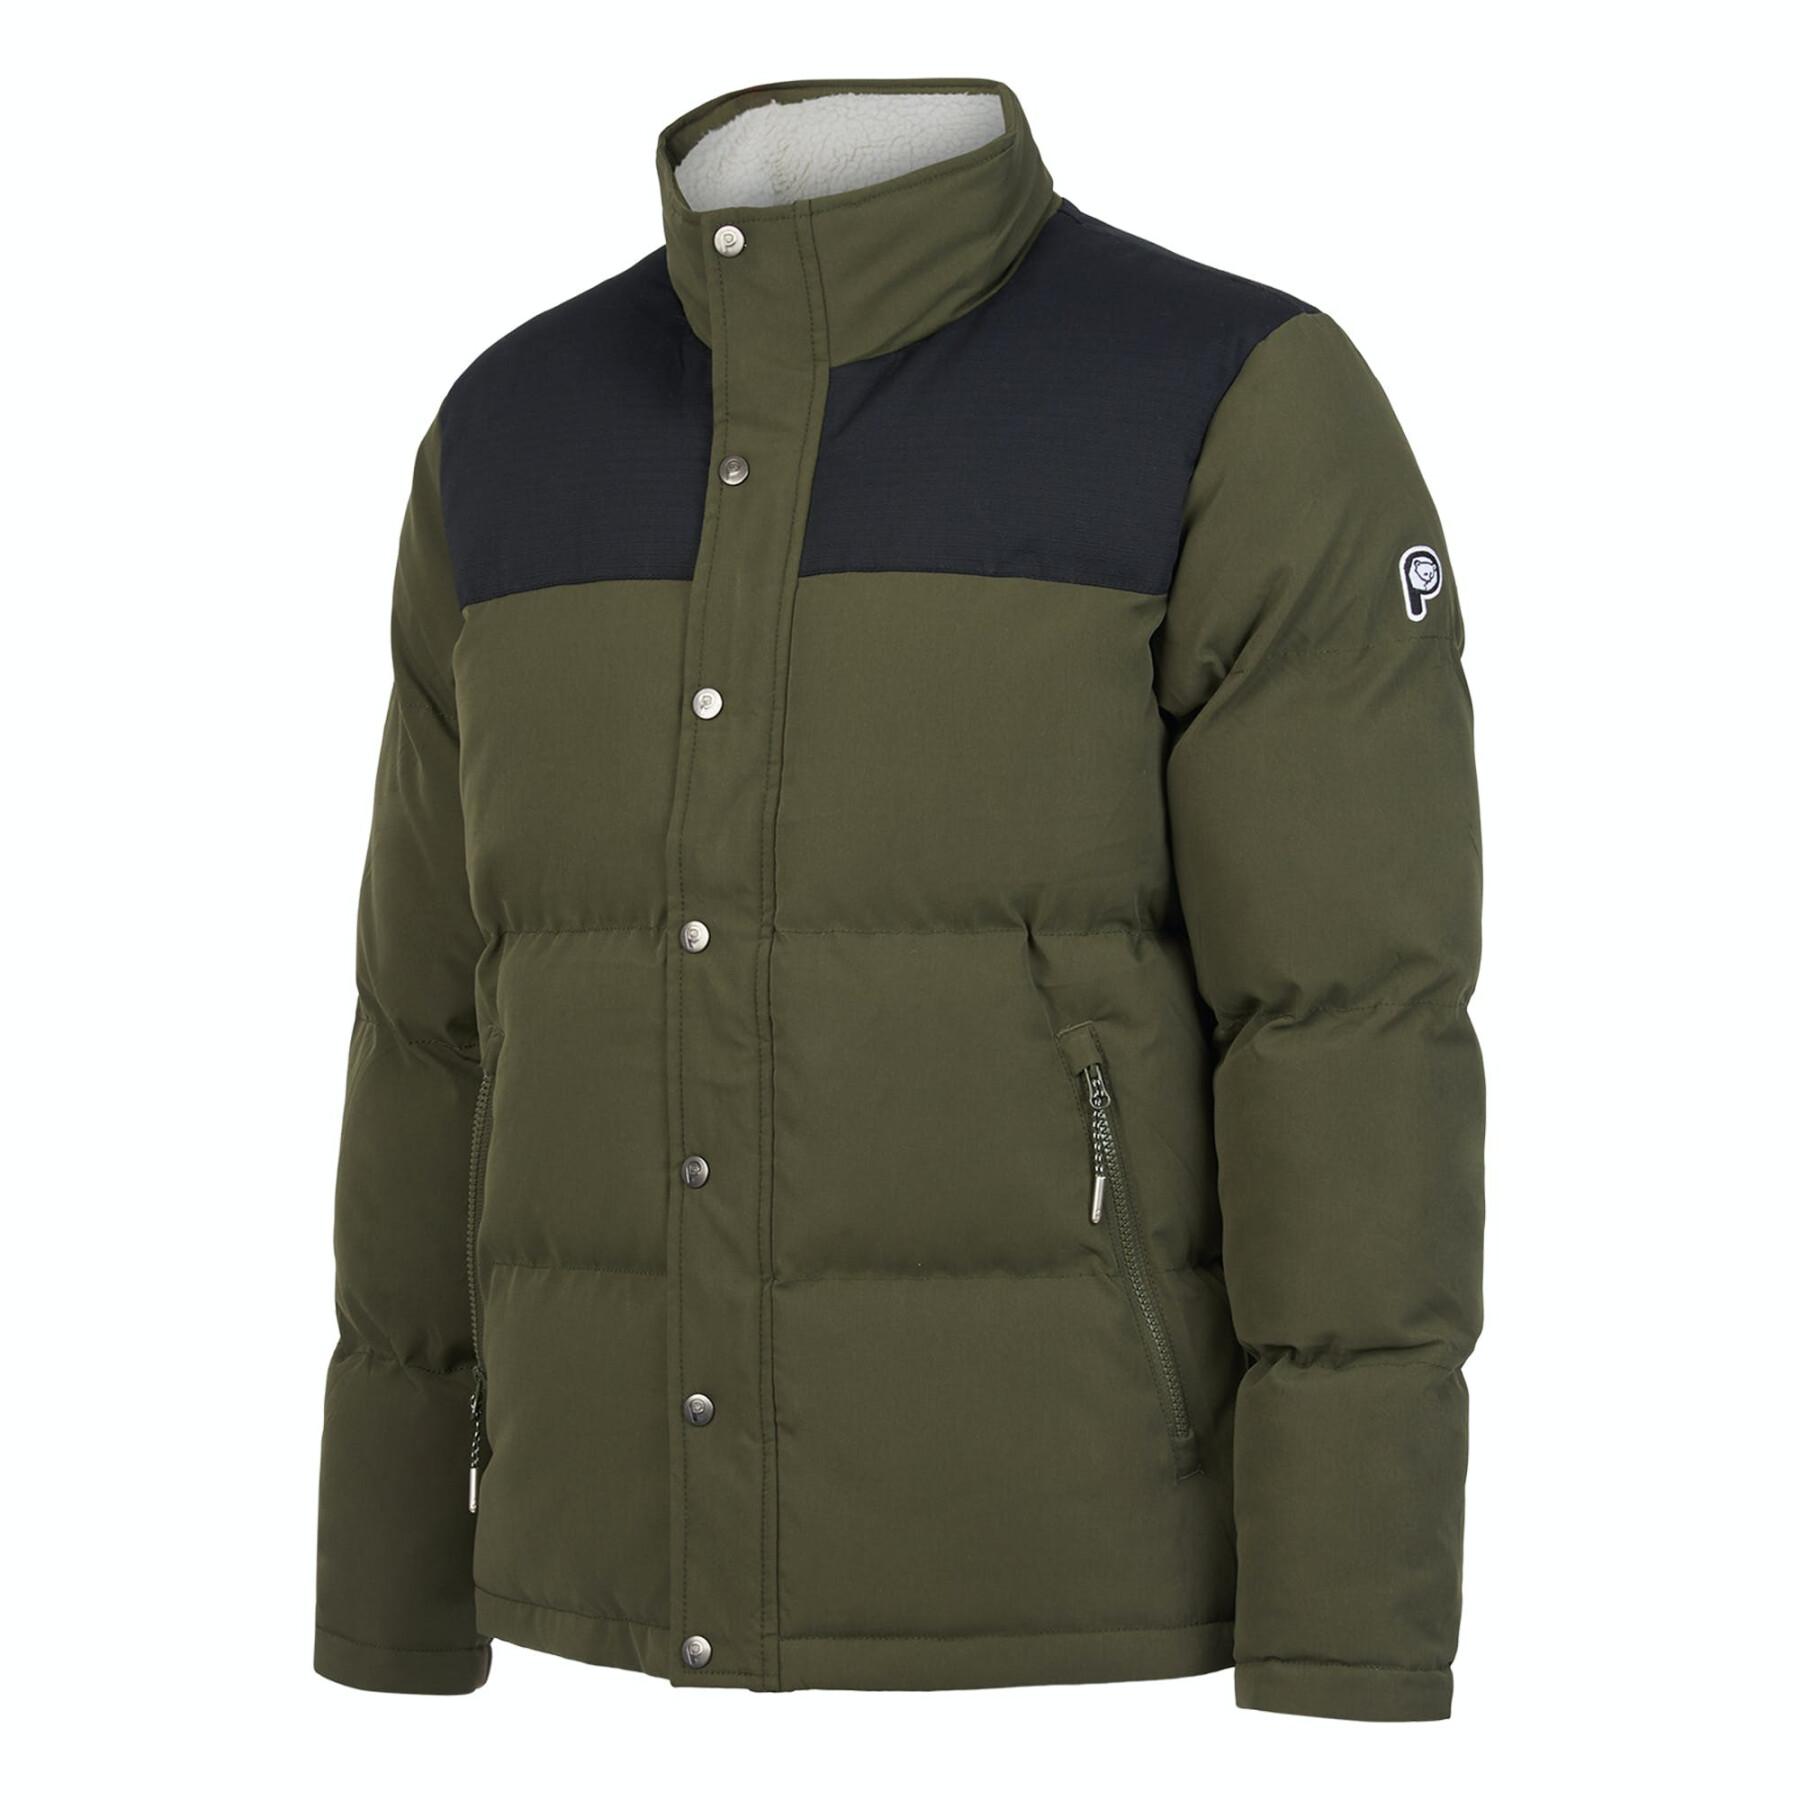 Quiltad jacka med trattformad hals Penfield bear cut and sew